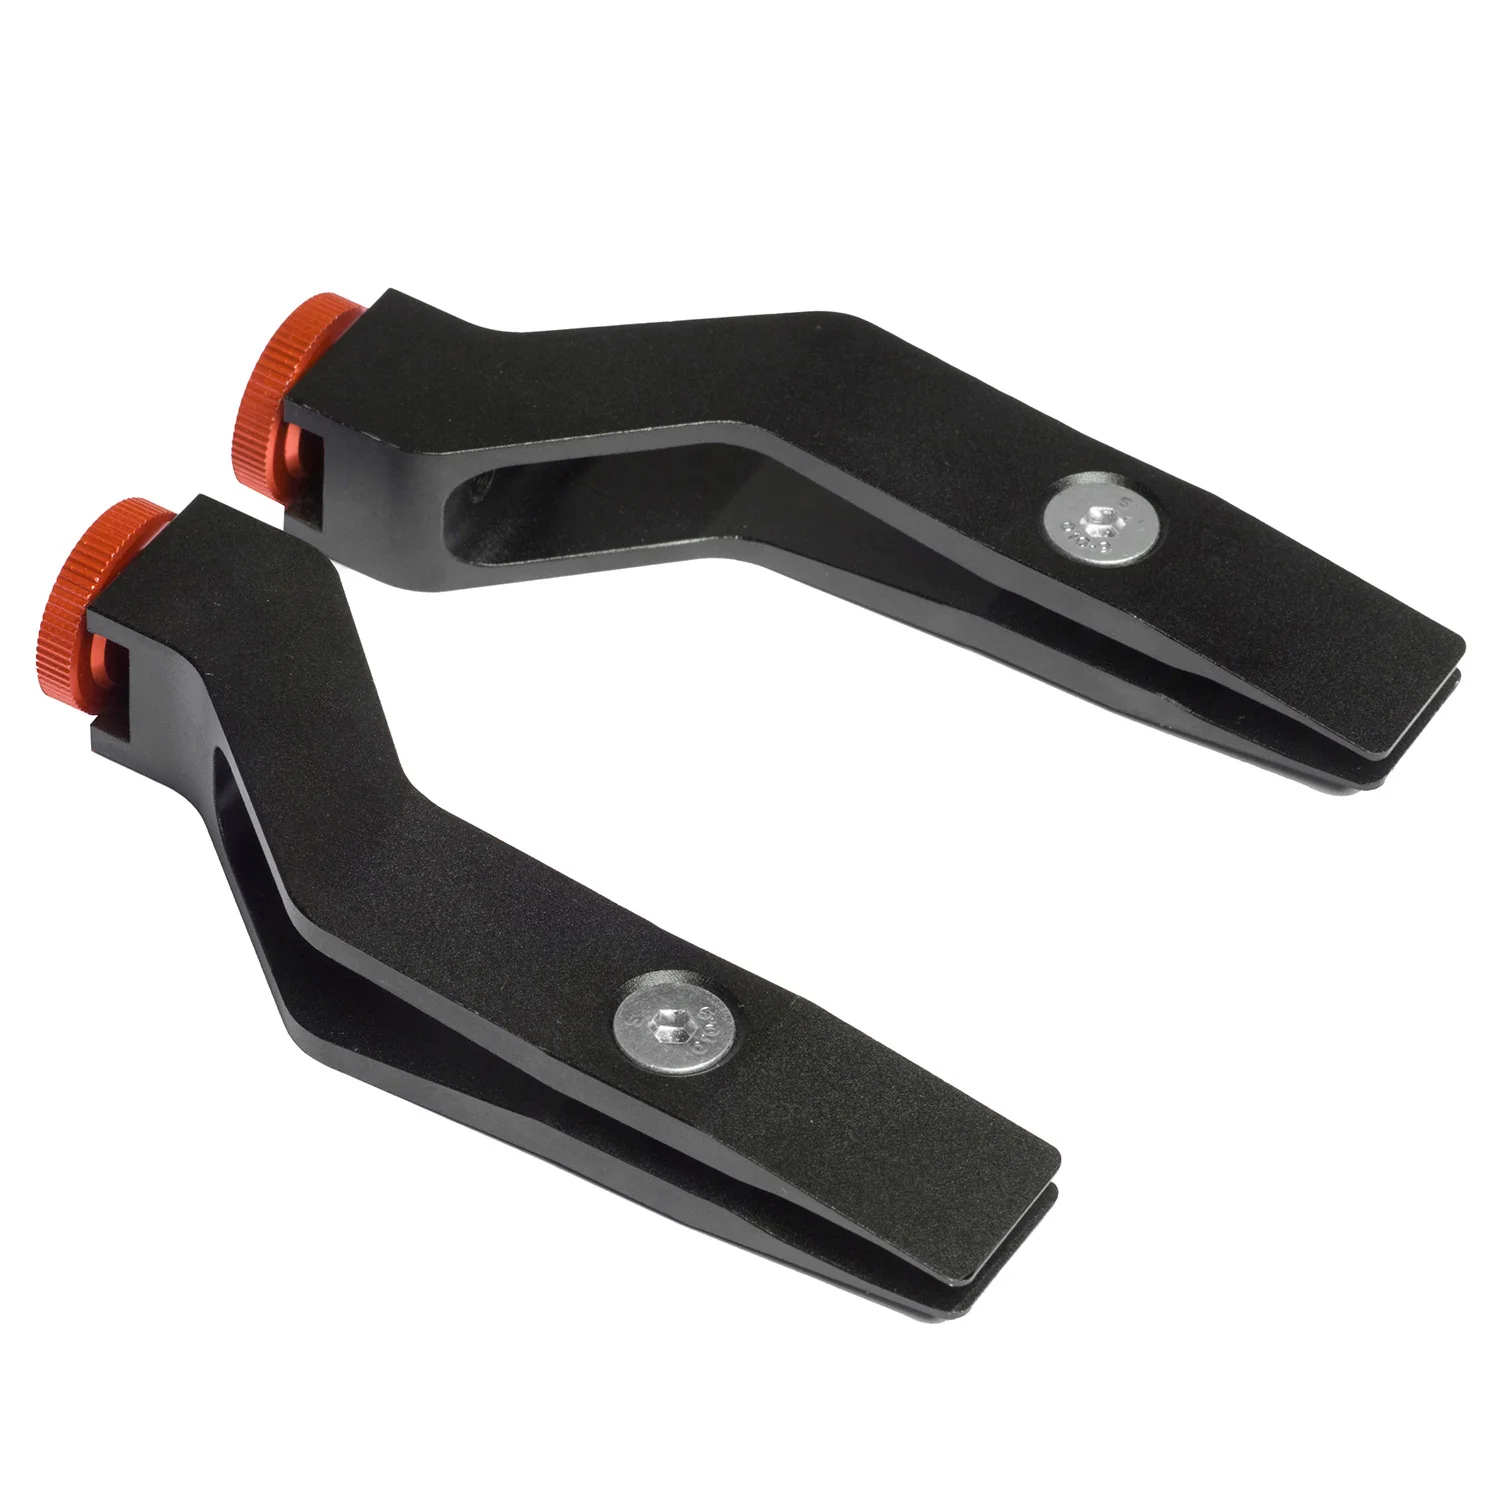 Will the r2 opti clamps fit on the hapstone RS bar? Allowing for lower sharpening angles on narrow blades?